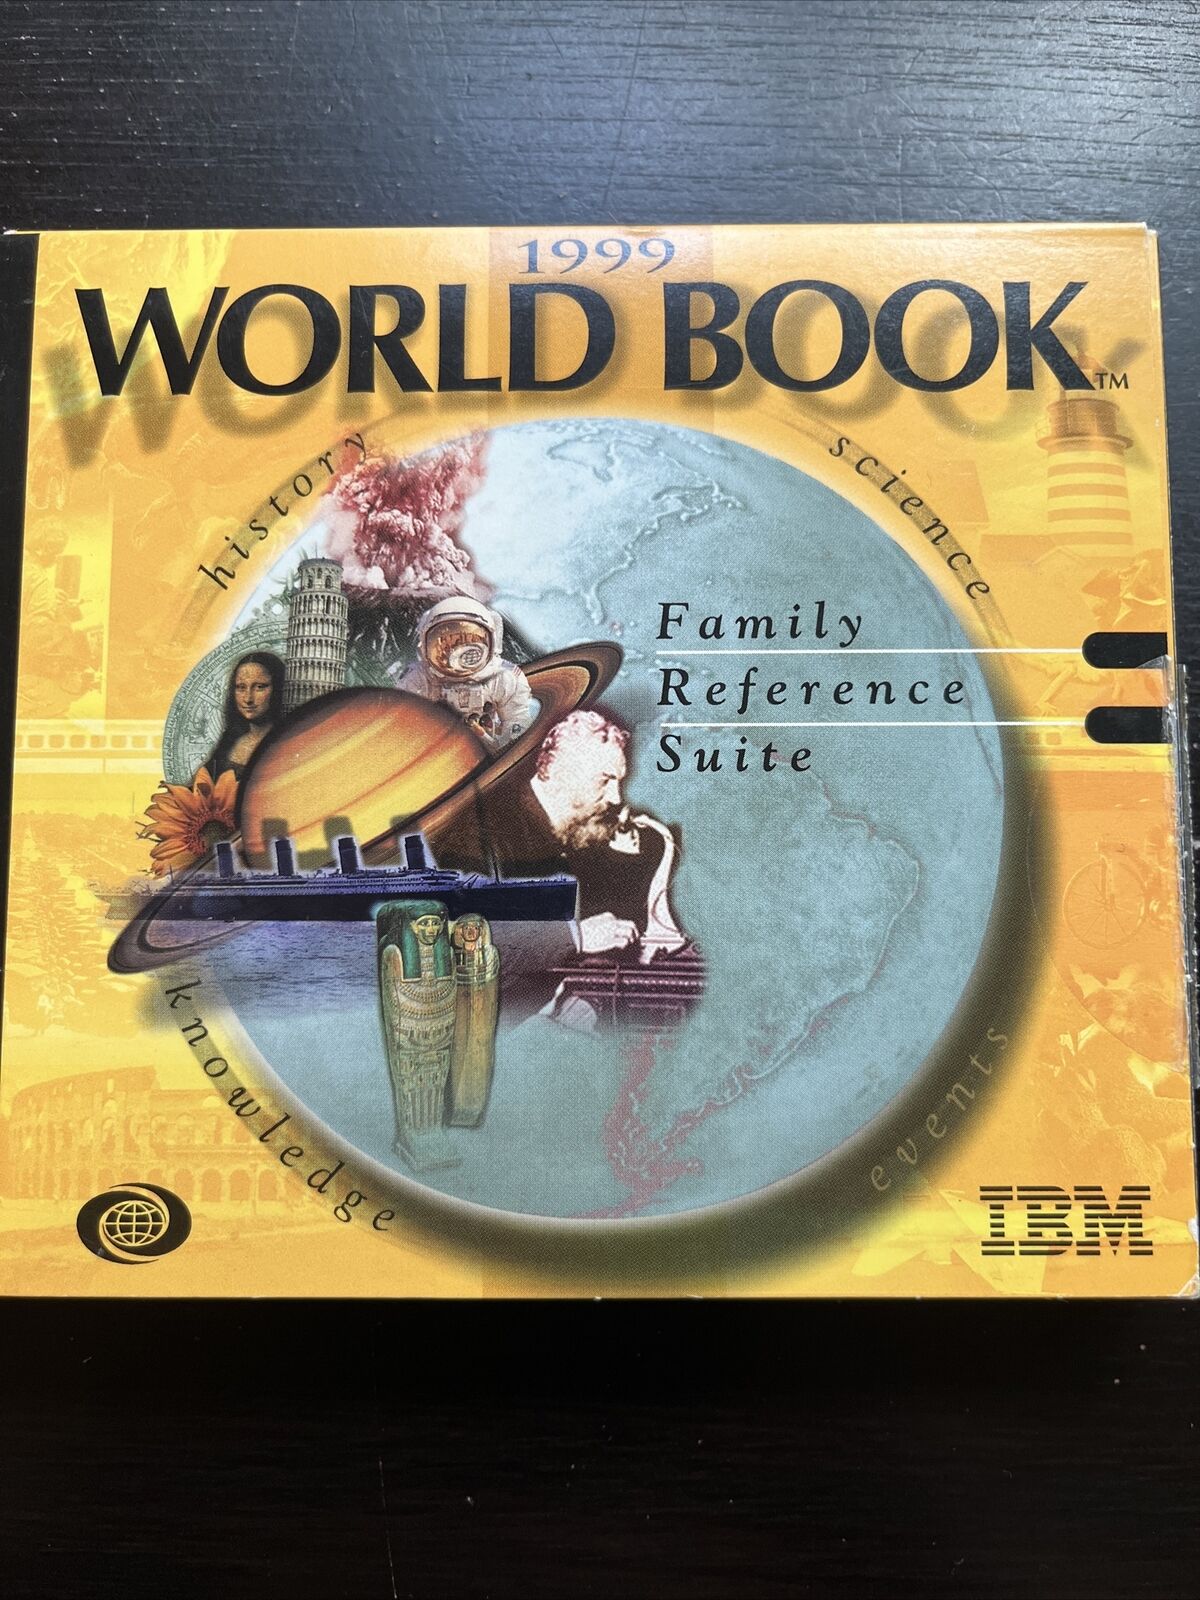 PC-Educational_IBM-1999 World Book Family Reference Suite_Original Box_1999_Mint